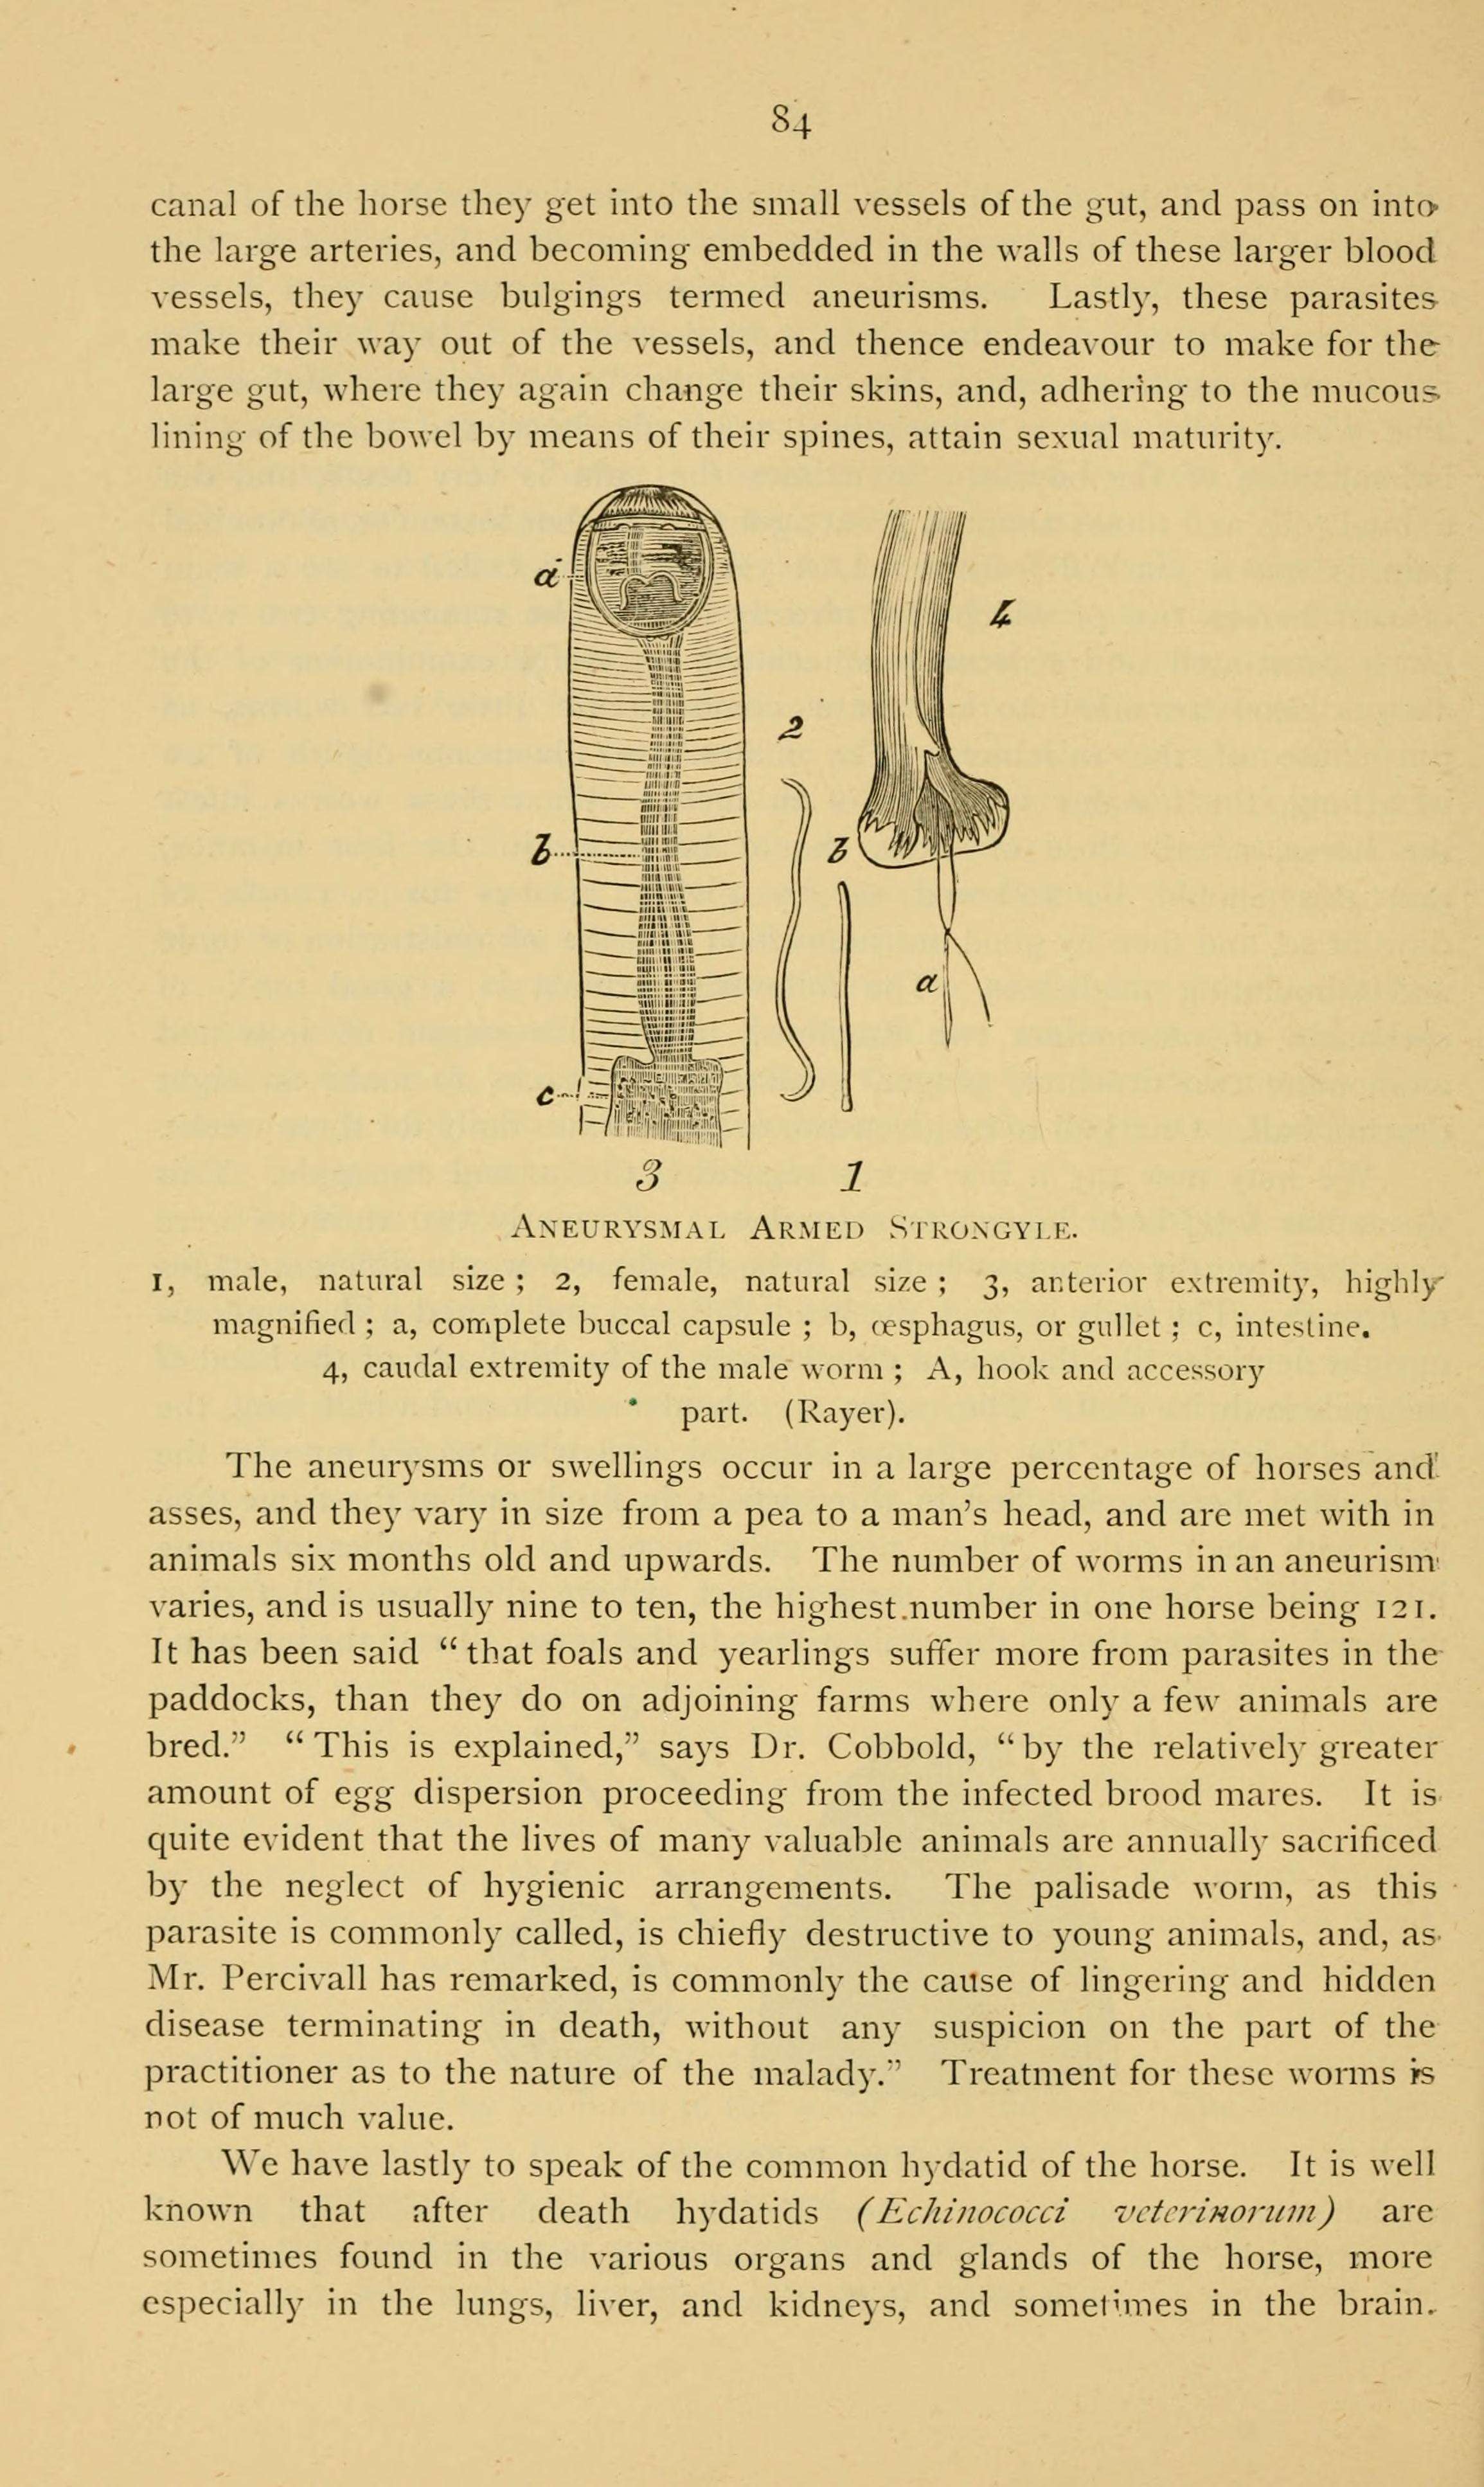 Image of Strongylidae